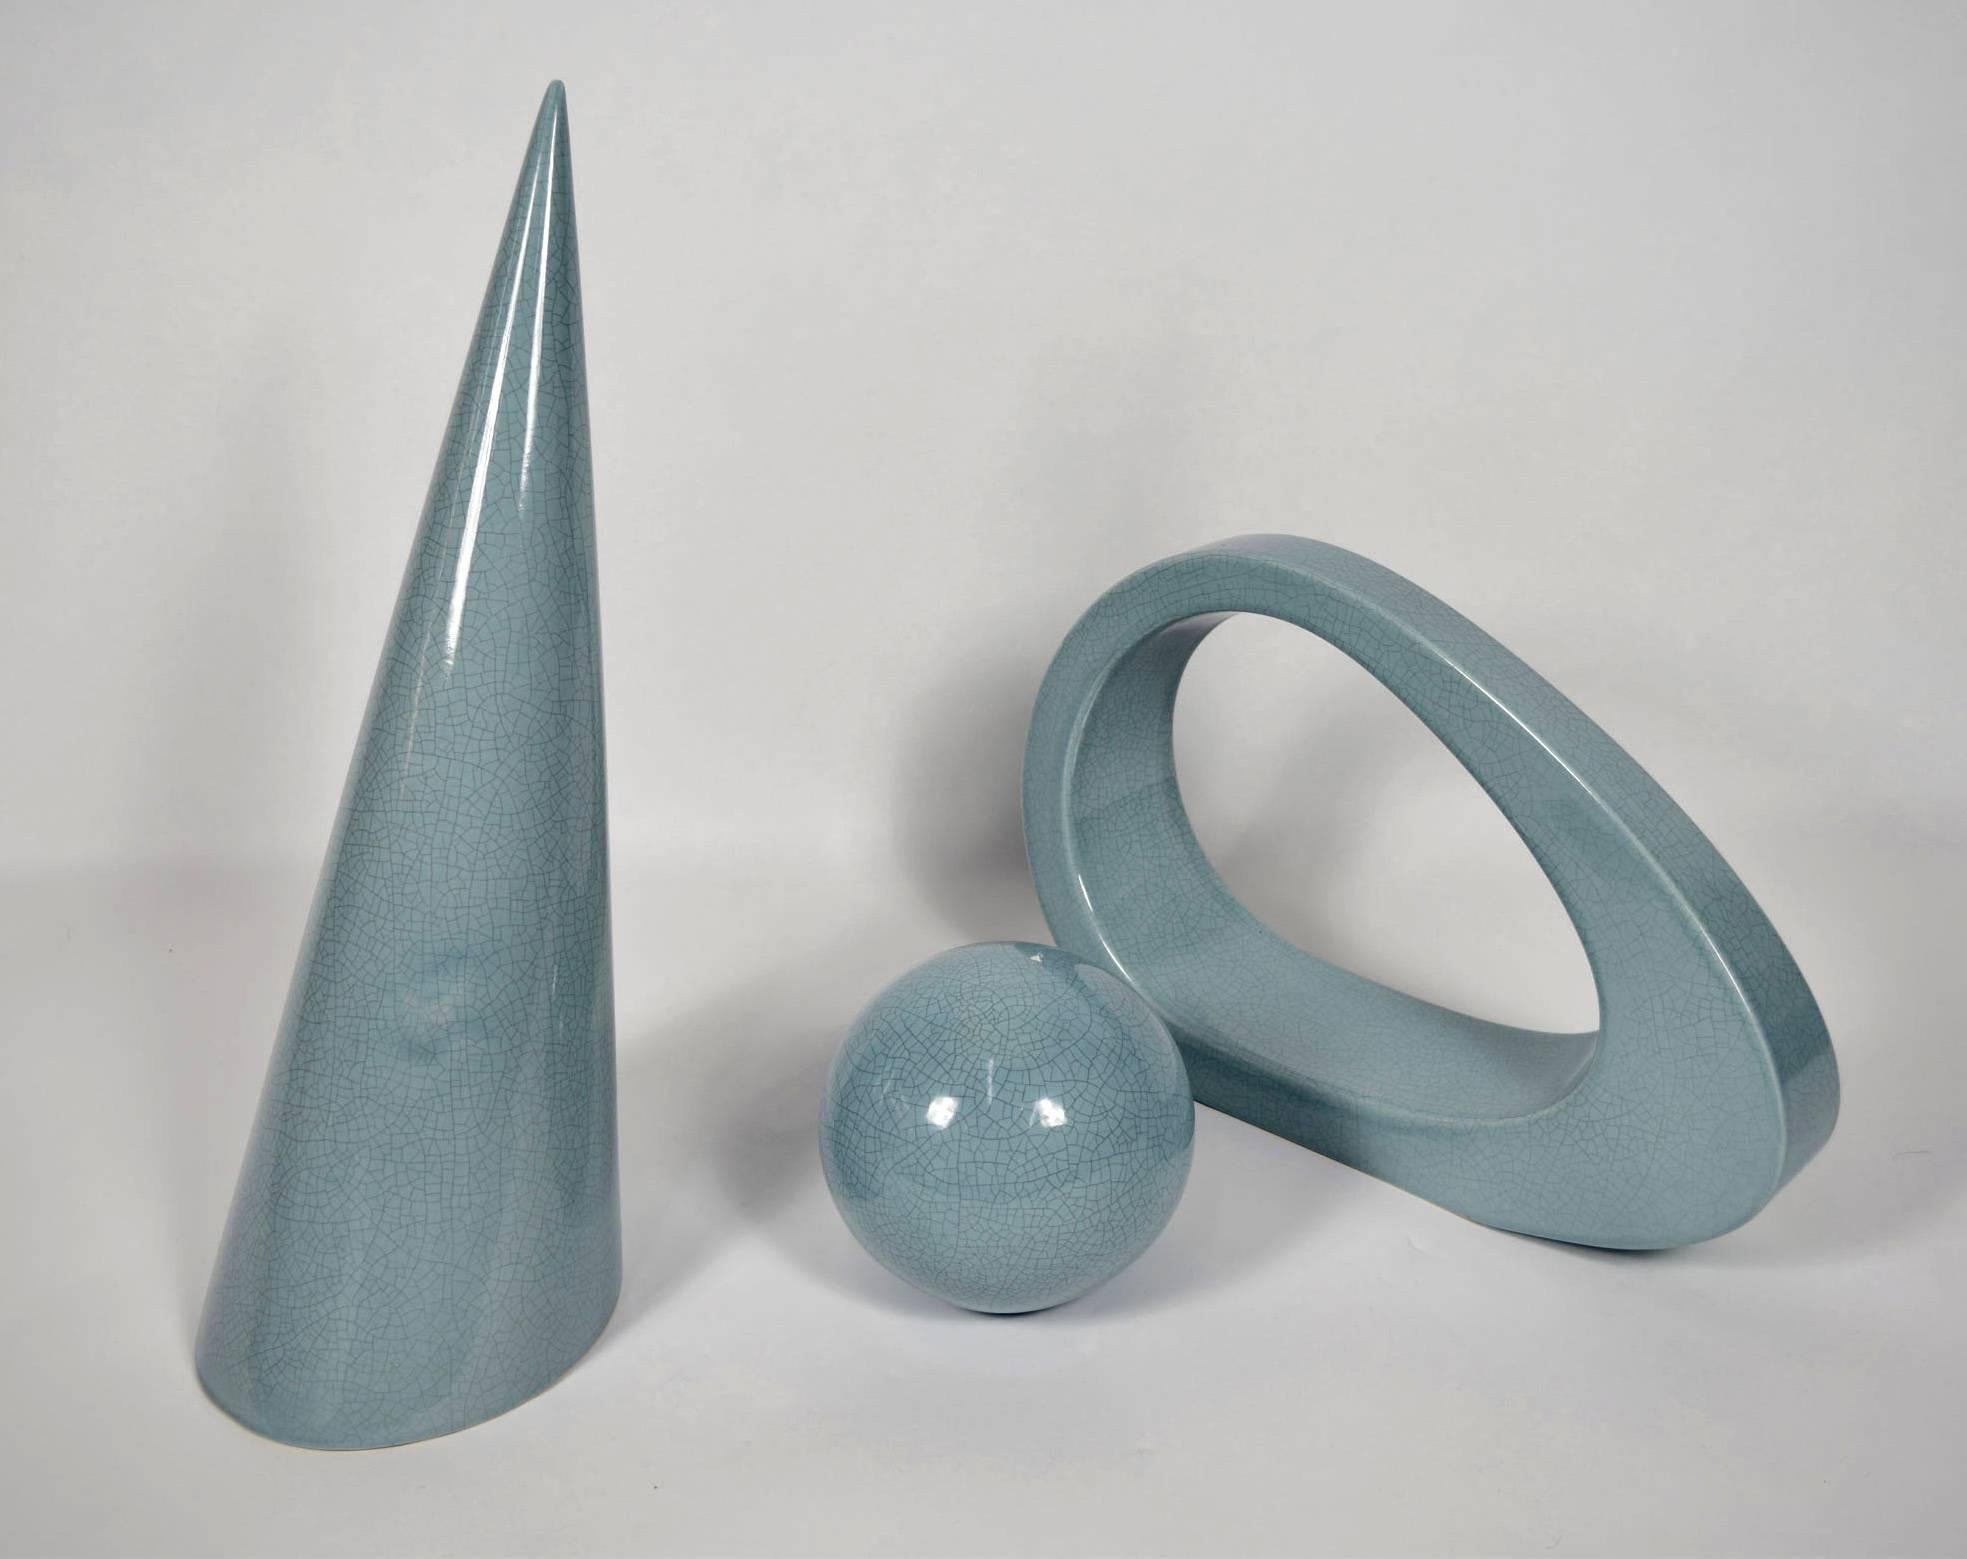 A really nice set of three ceramic pieces by Jaru. Ceramic has a crackle pattern and pieces are a light blue. Cone is 23.5